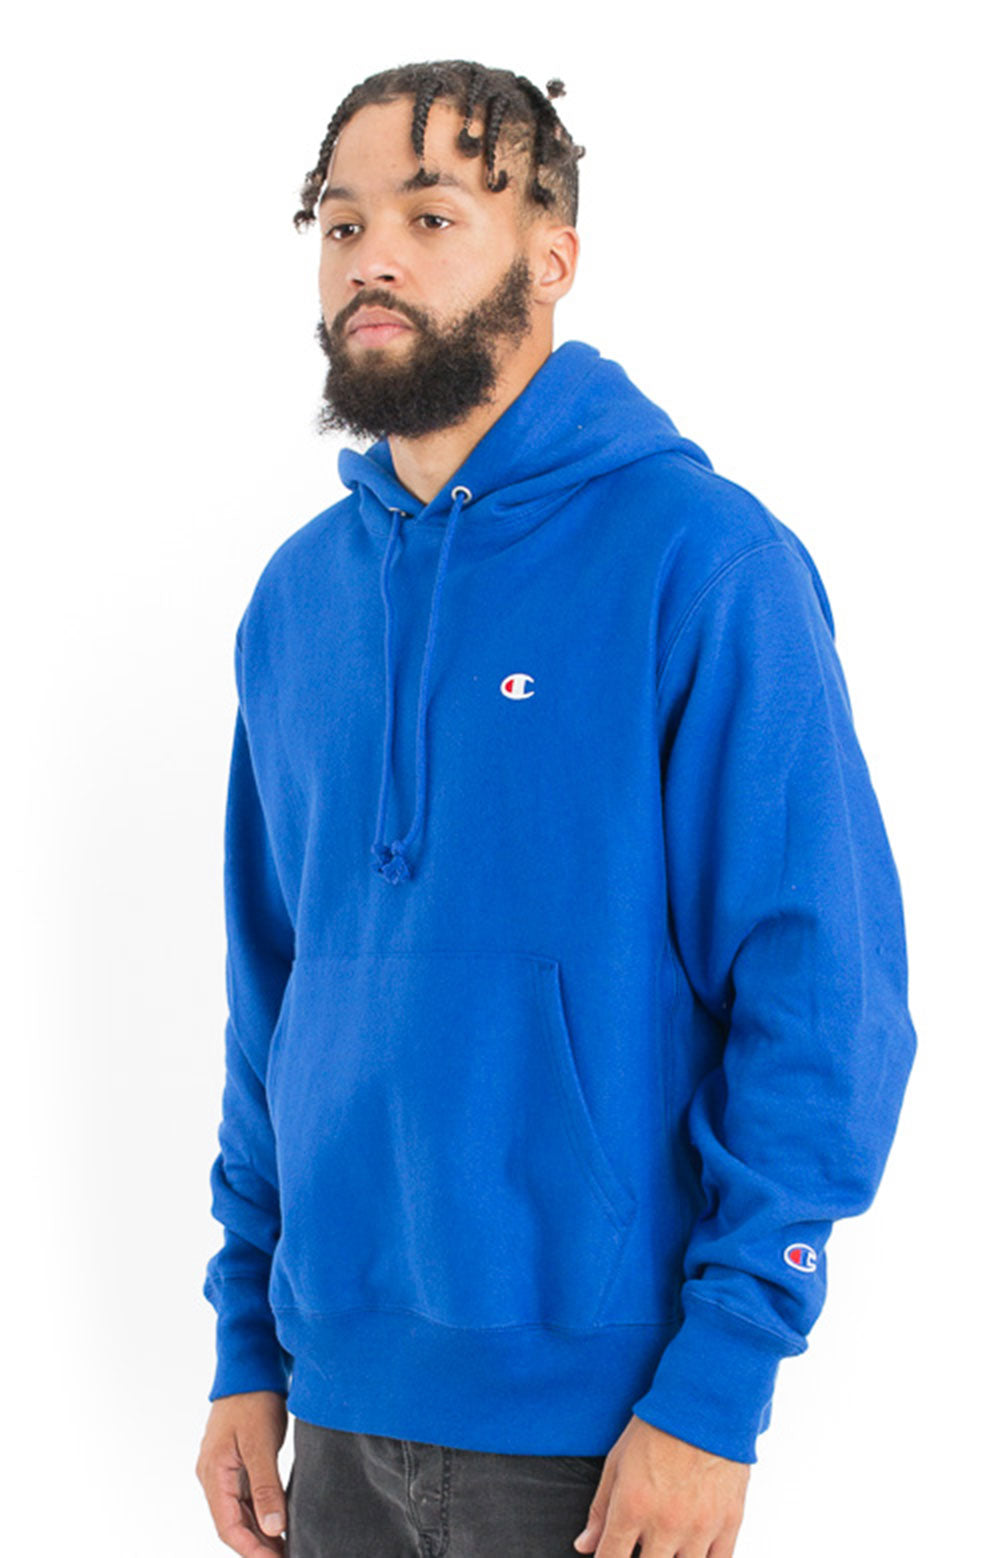 Reverse Weave Pullover Hoodie - Surf The Web